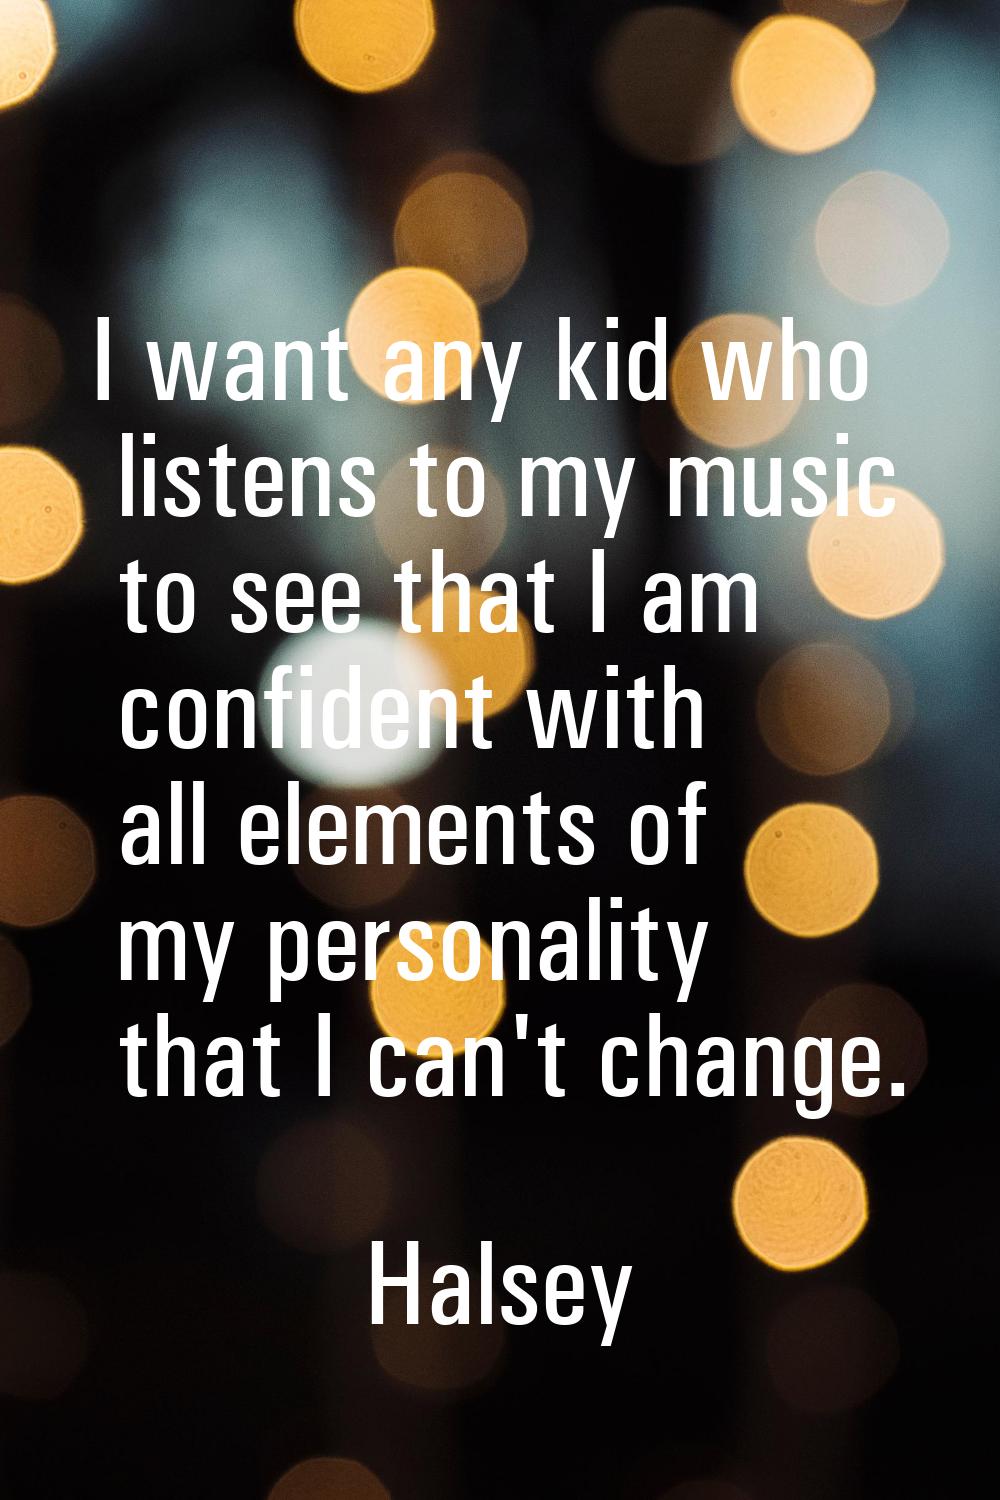 I want any kid who listens to my music to see that I am confident with all elements of my personali